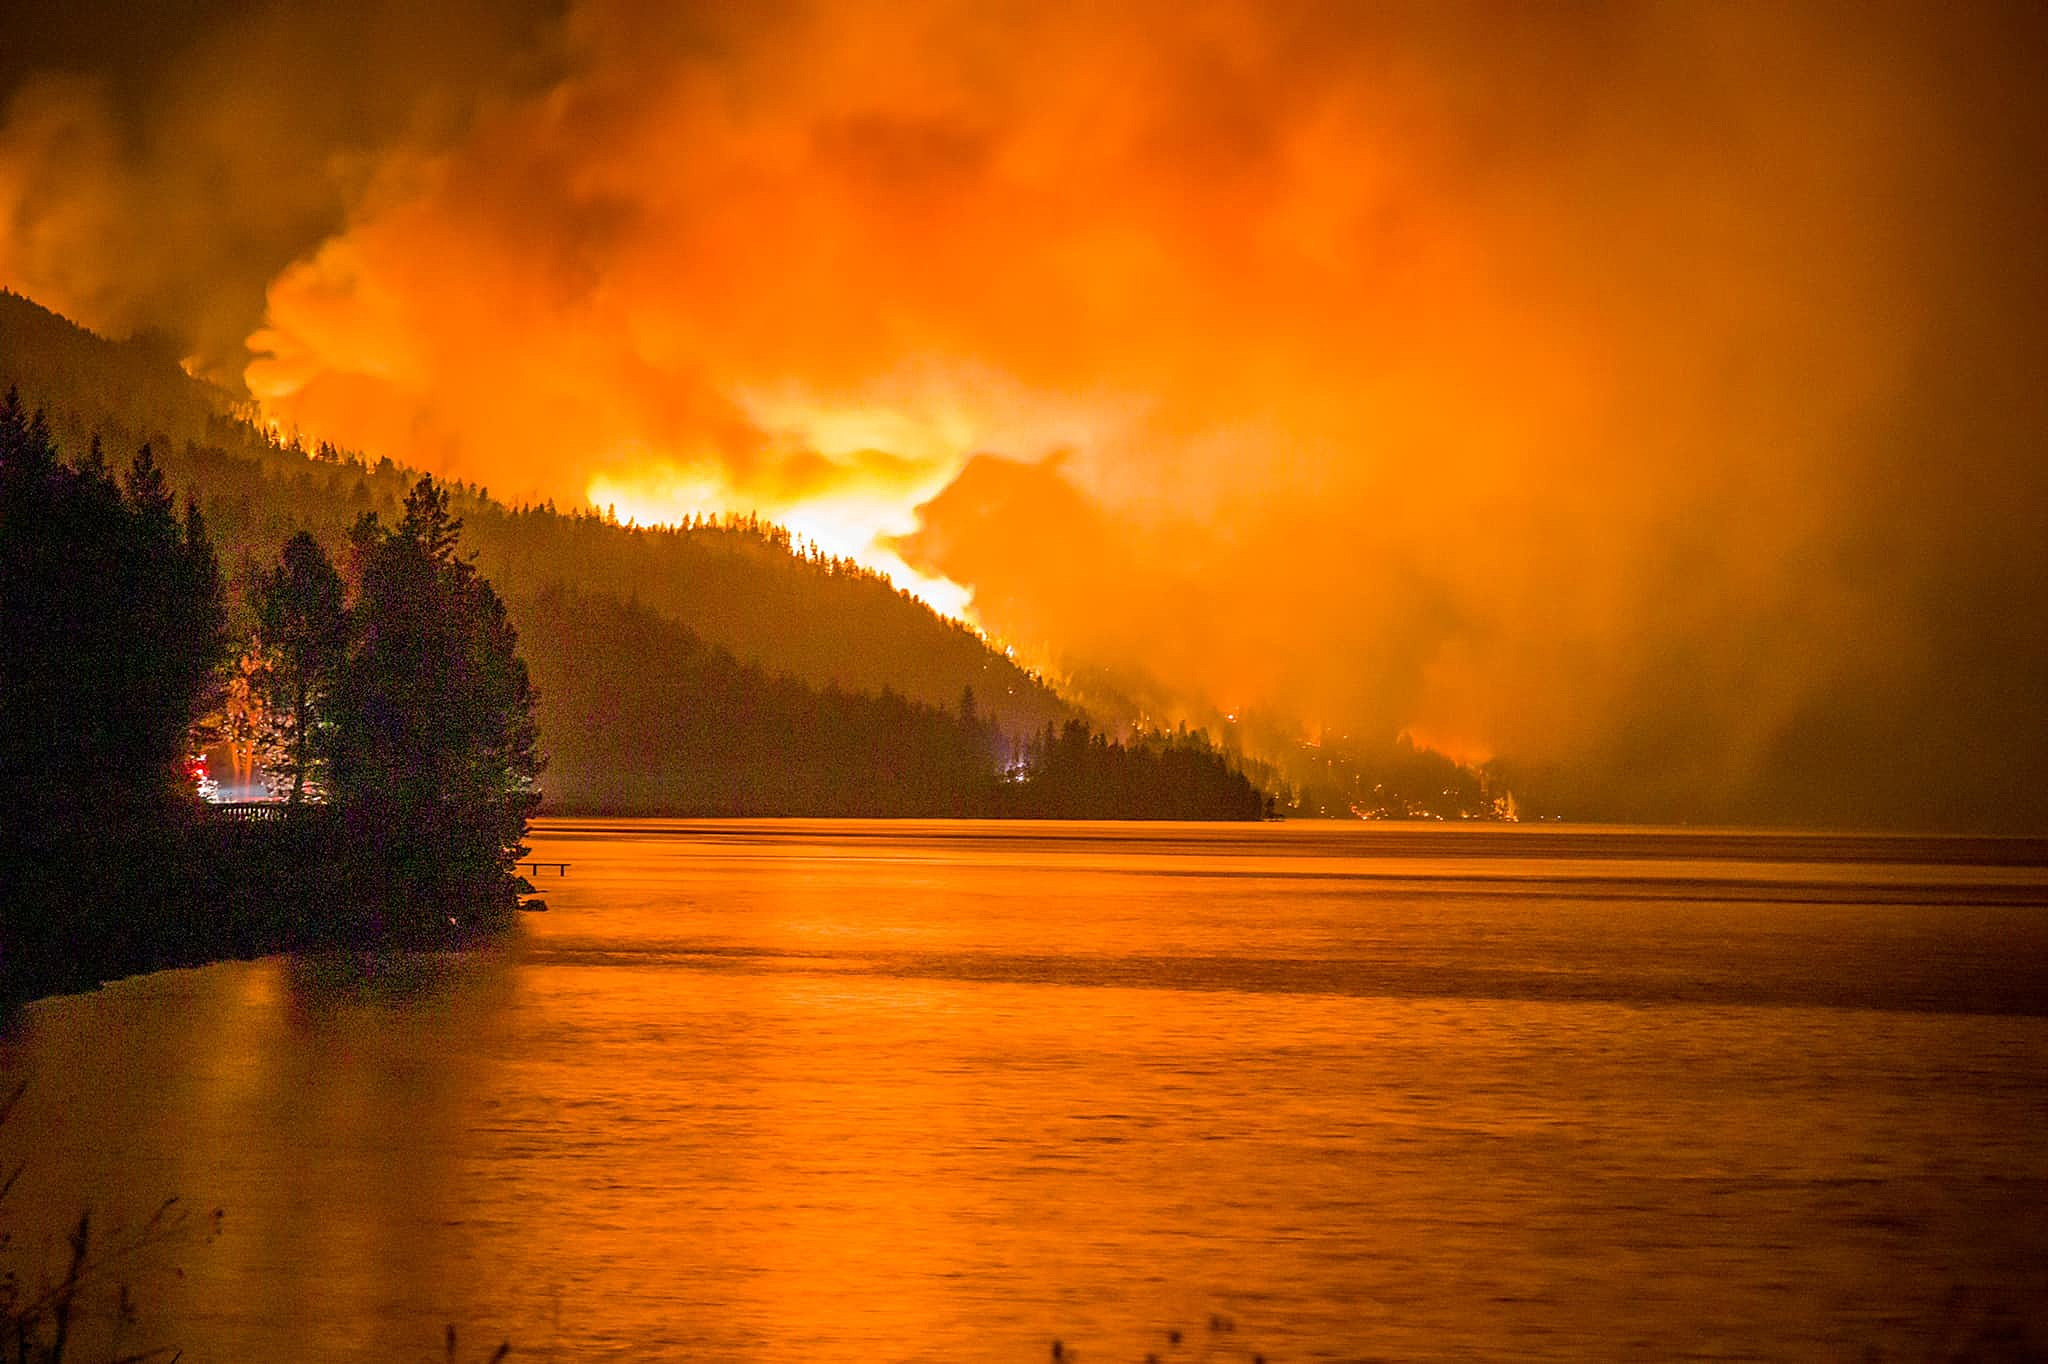 Montana wildfires 600 people displaced from homes; Boulder 2700 fire